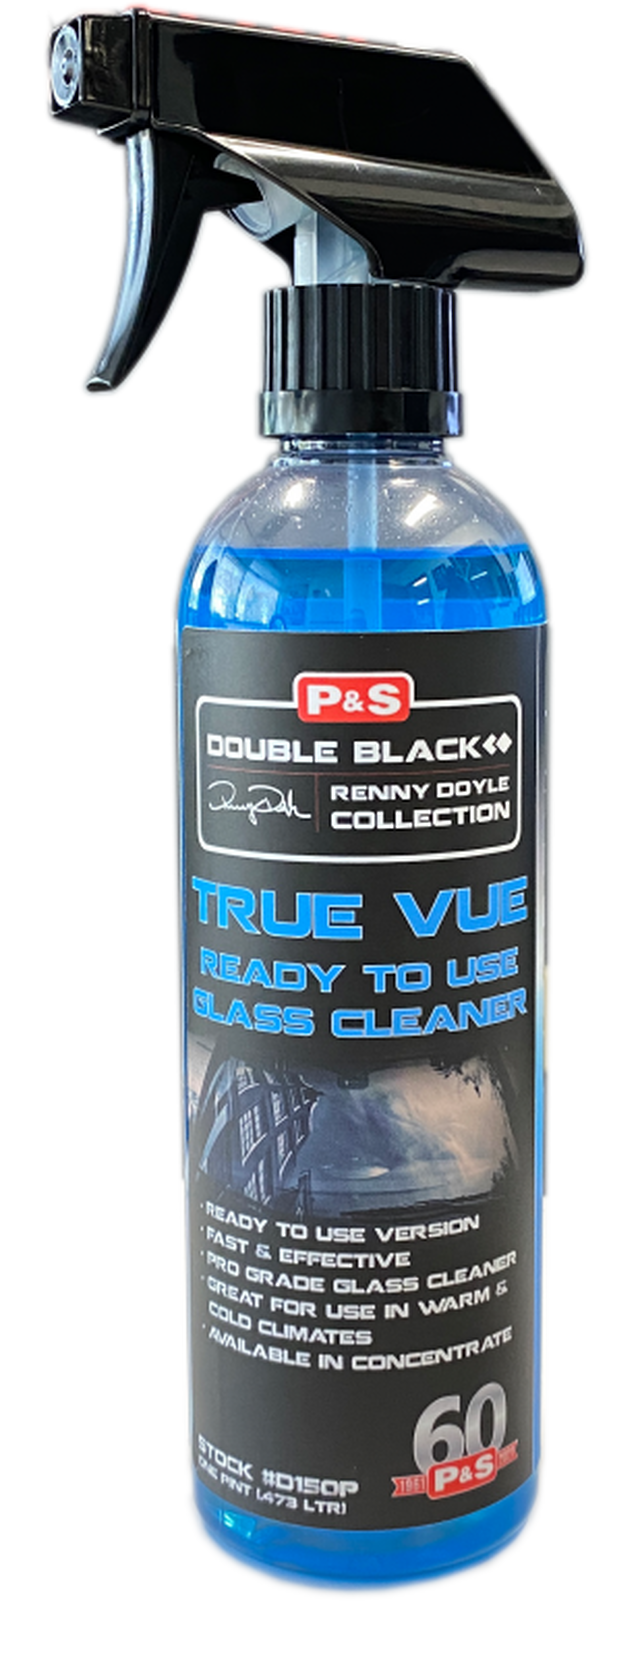 P&S Truve Vue ready to use glass cleaner